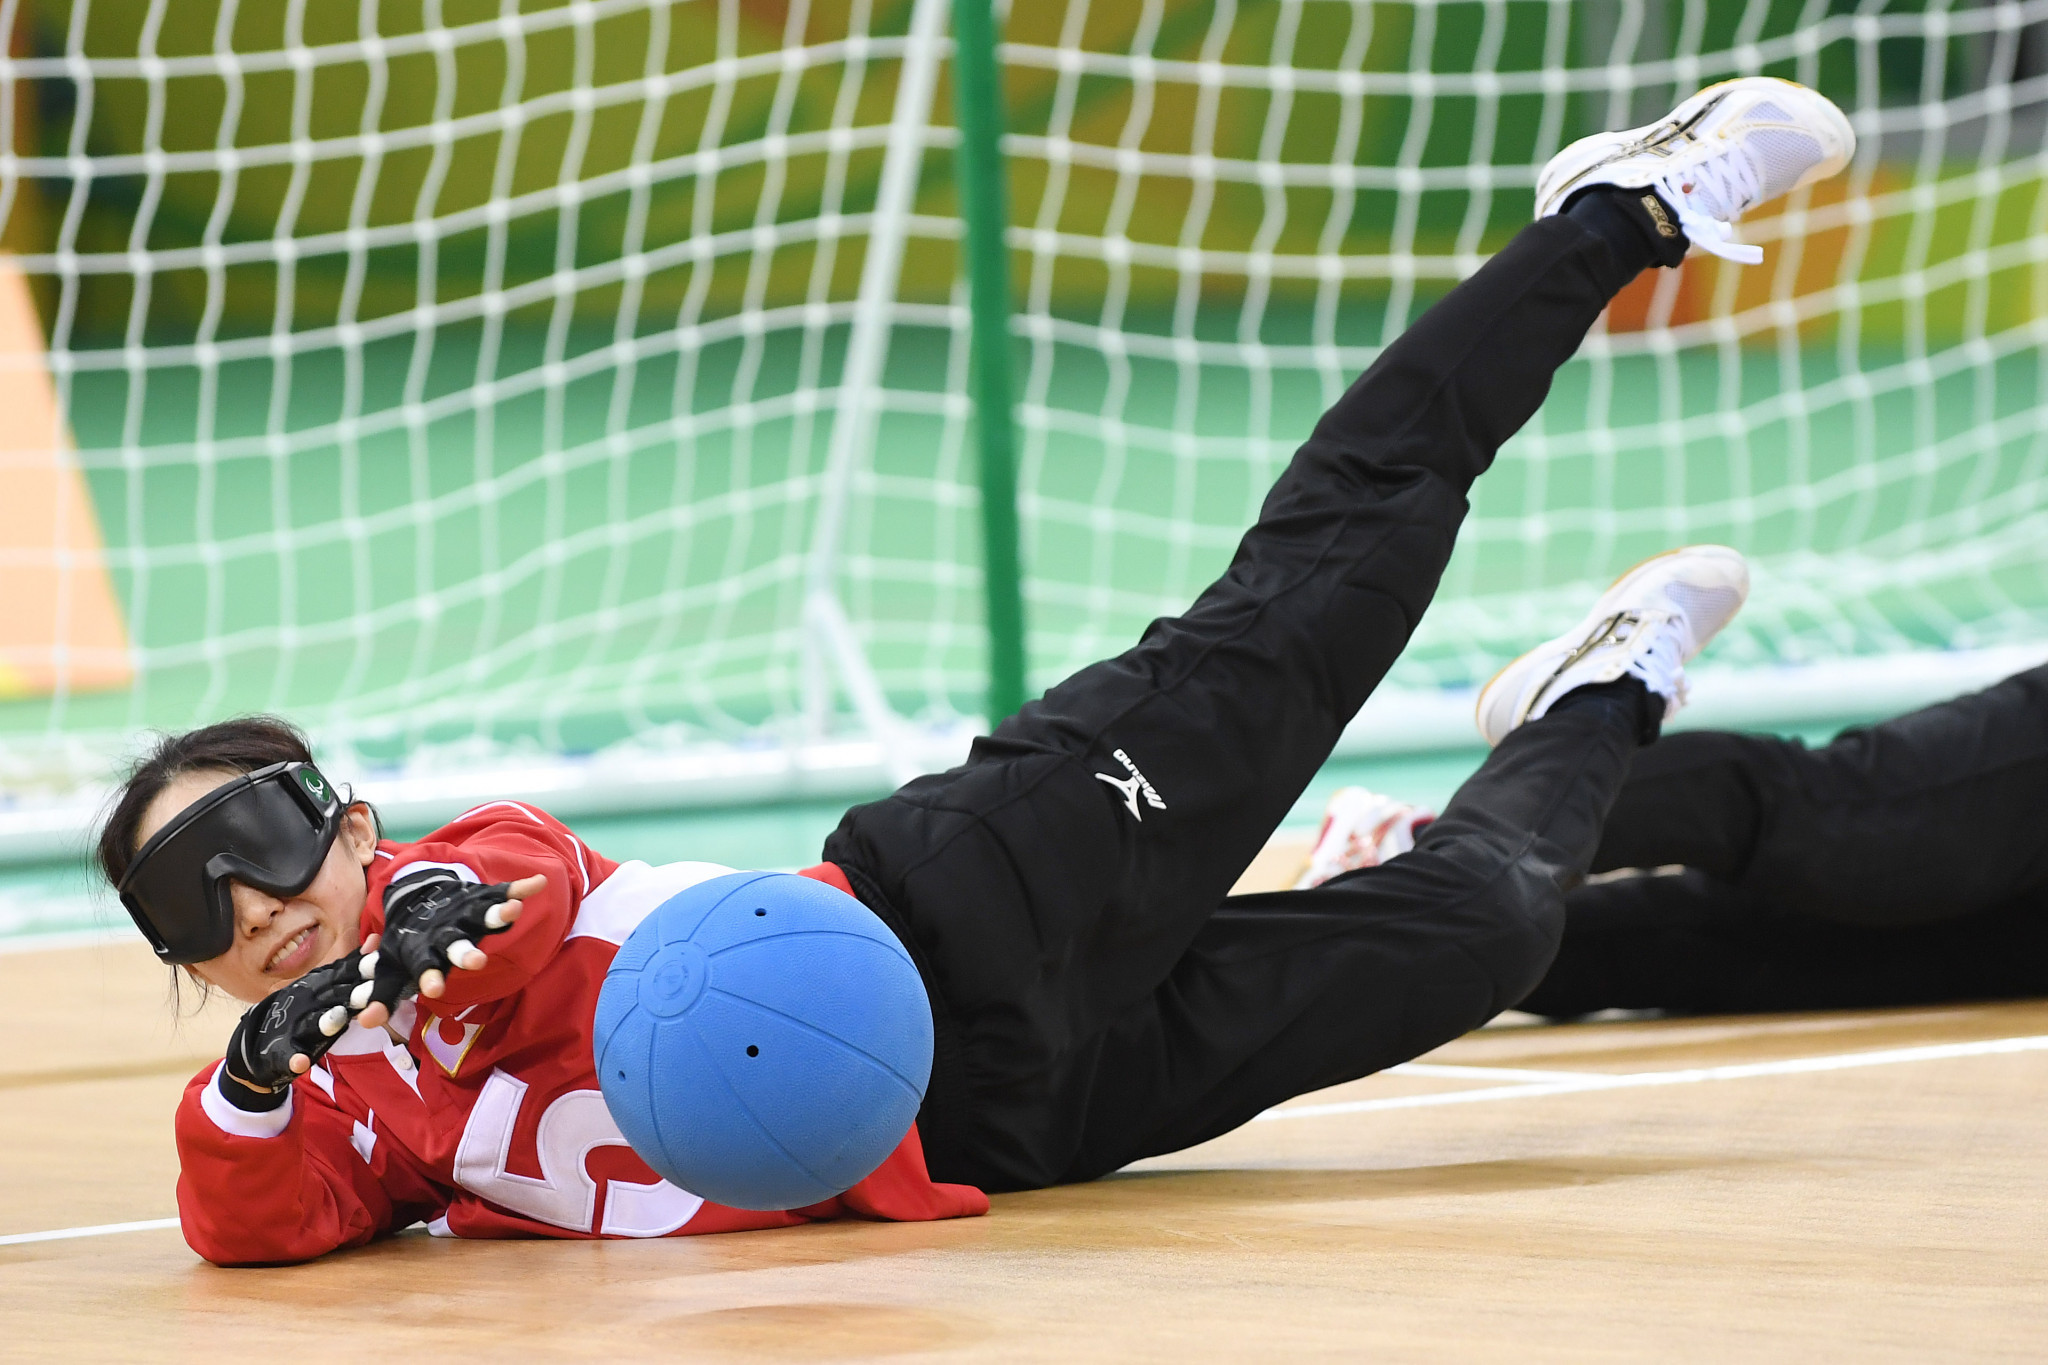 As hosts, Japan have qualified automatically for the goalball competitions at the Tokyo 2020 Paralympic Games ©Getty Images